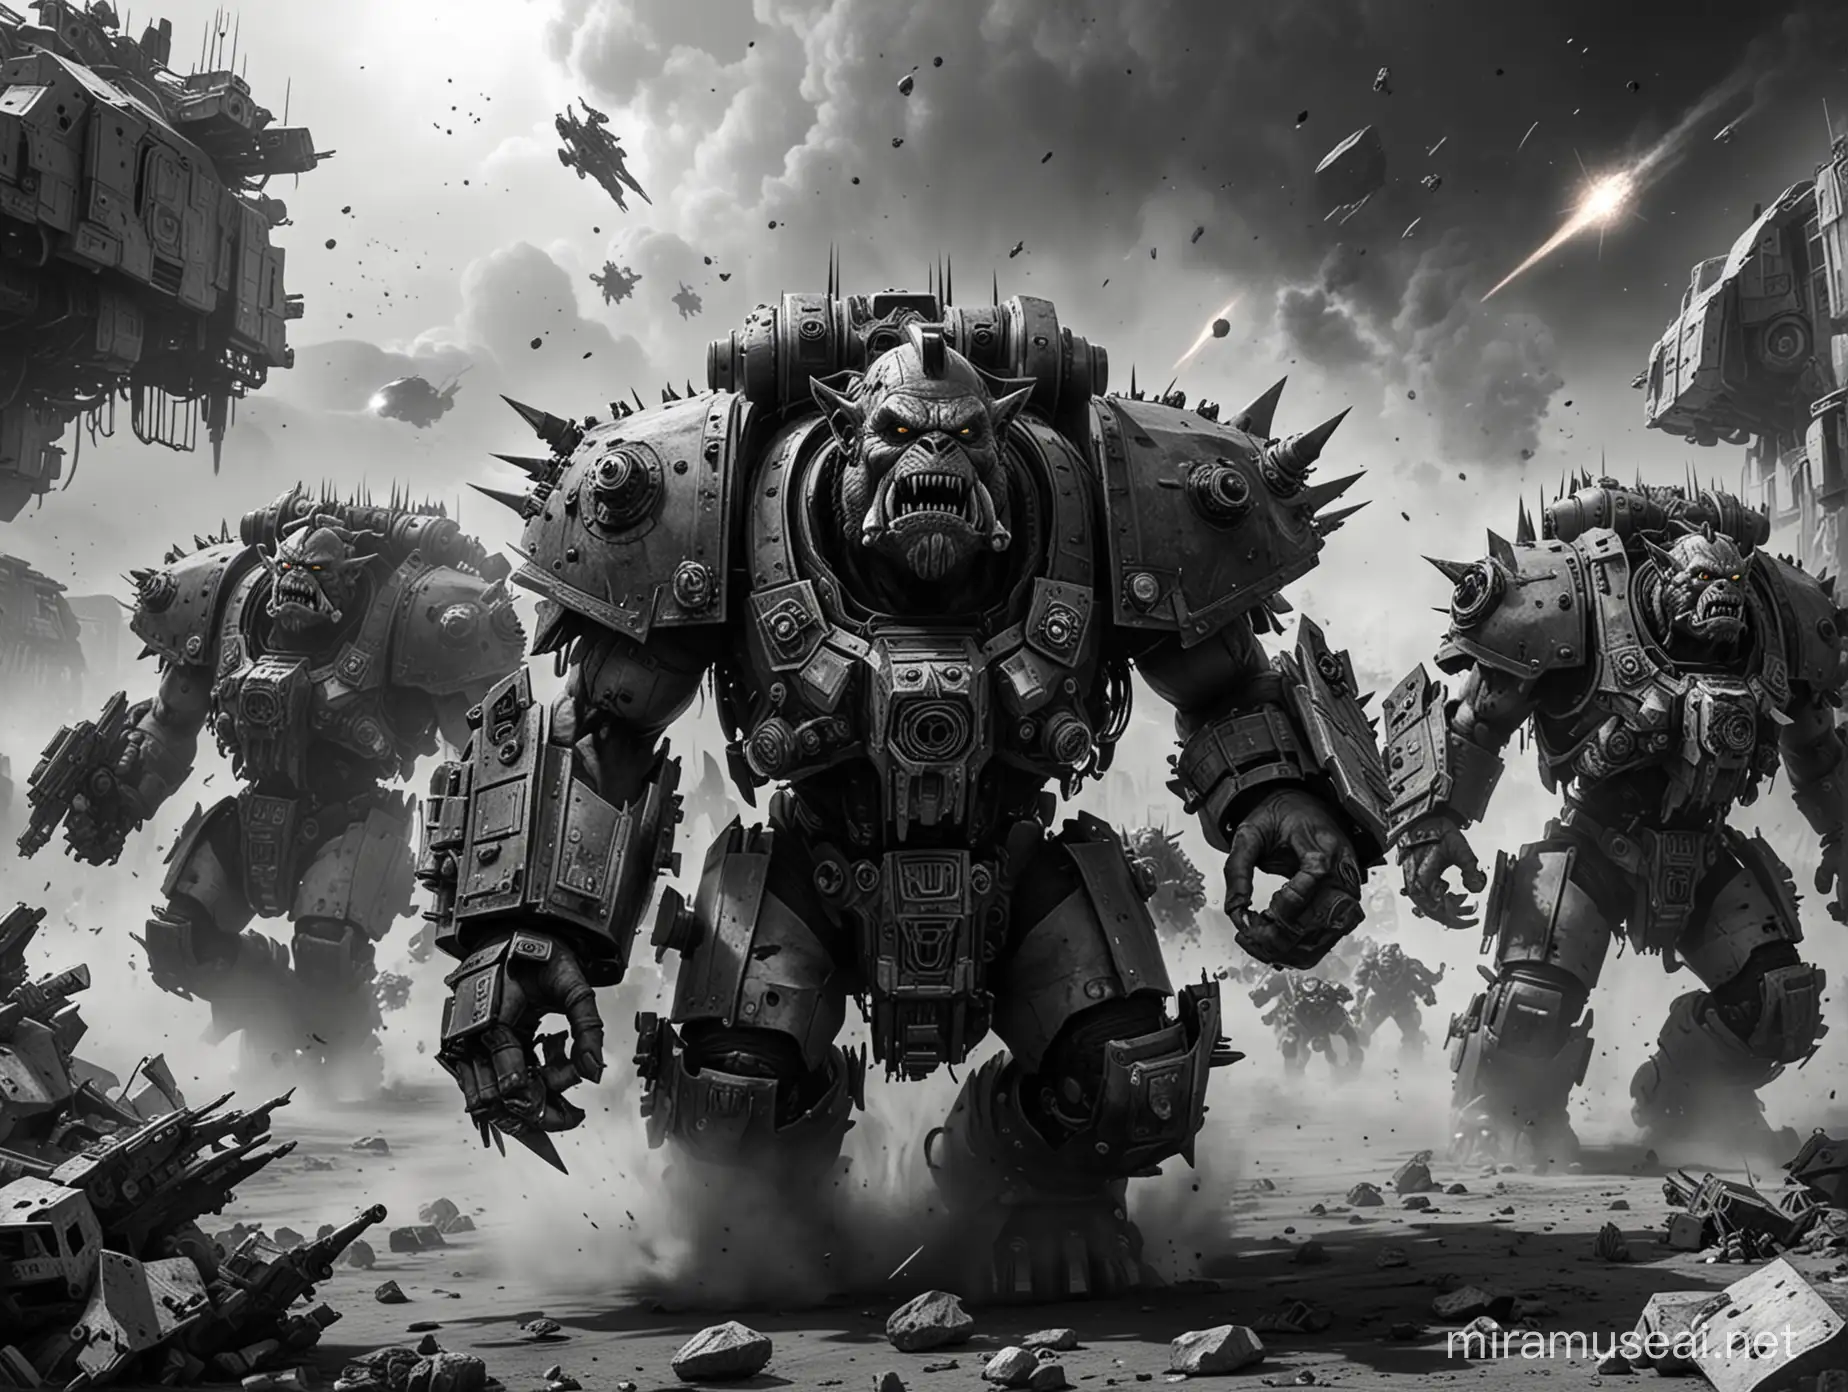 Angry Space Orks Emerging from Vehicles in Monochrome SciFi Scene